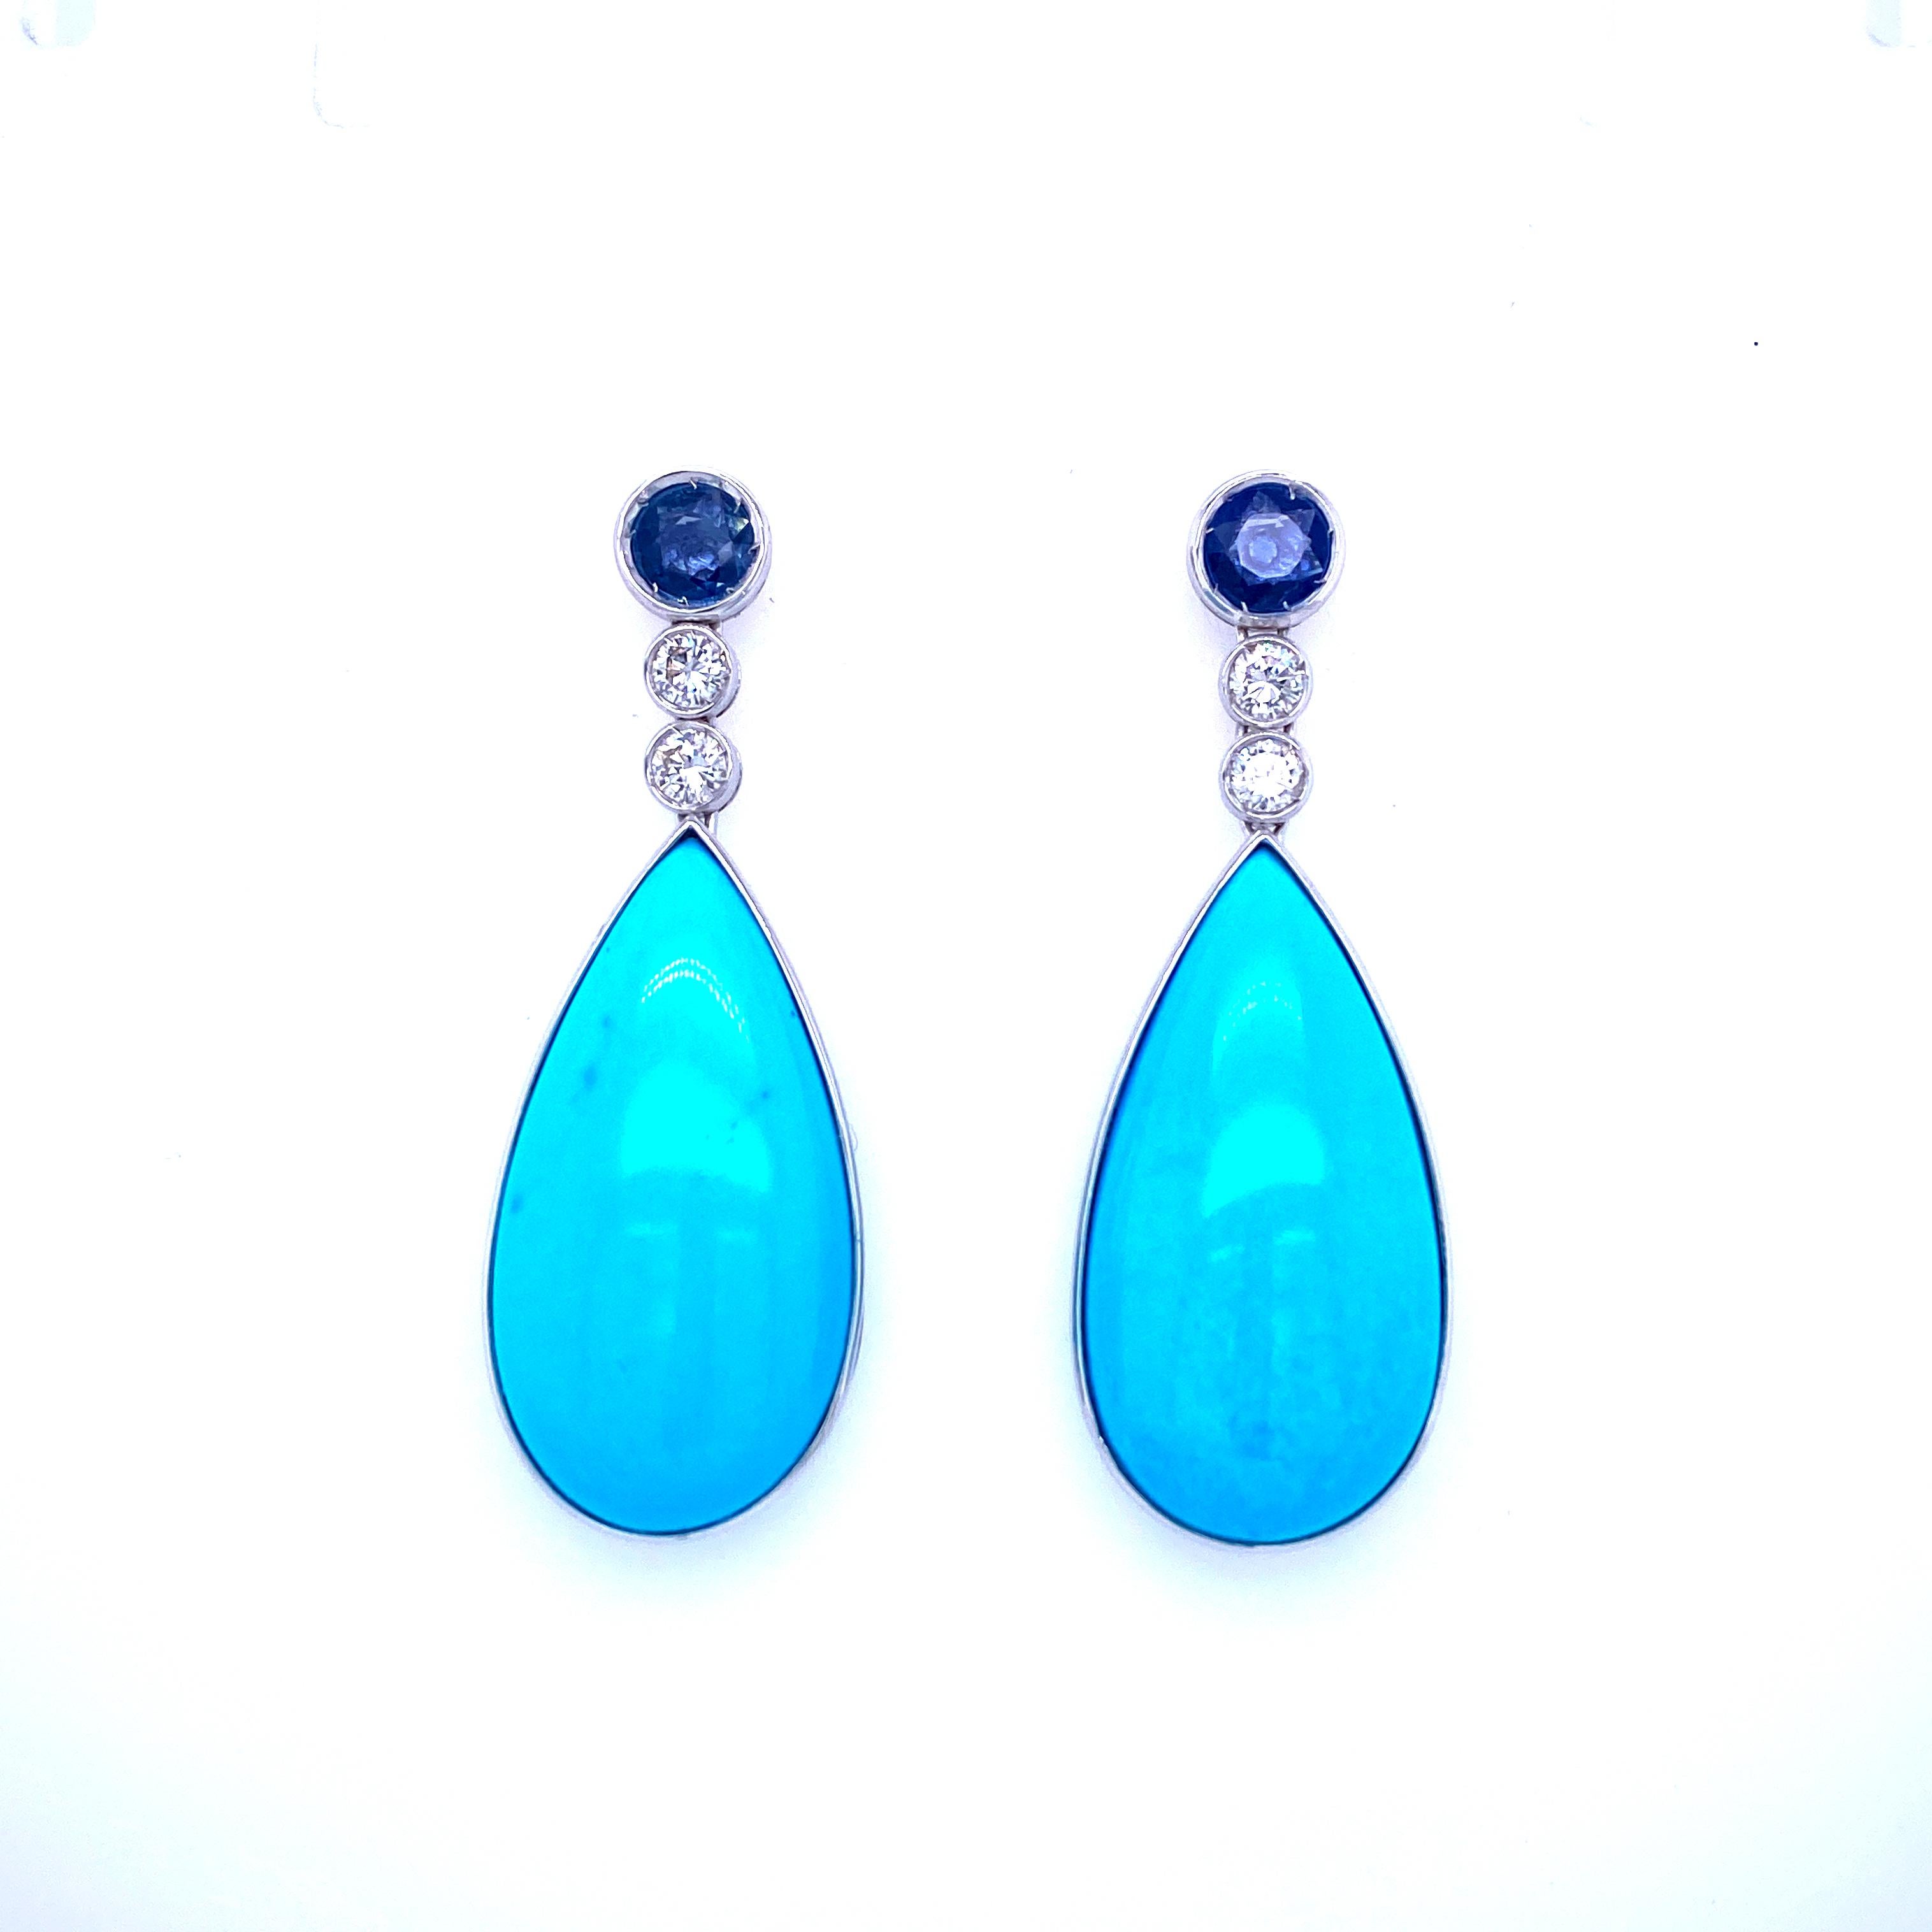 Stunning pair of 18k white gold hand-made pendant earrings, dated 1980, origin Italy.
Each earring features a large Natural drop flawless Turquoise, great quality, very rare today, set with 1.20 carats of Natural Sapphires and sparkling round